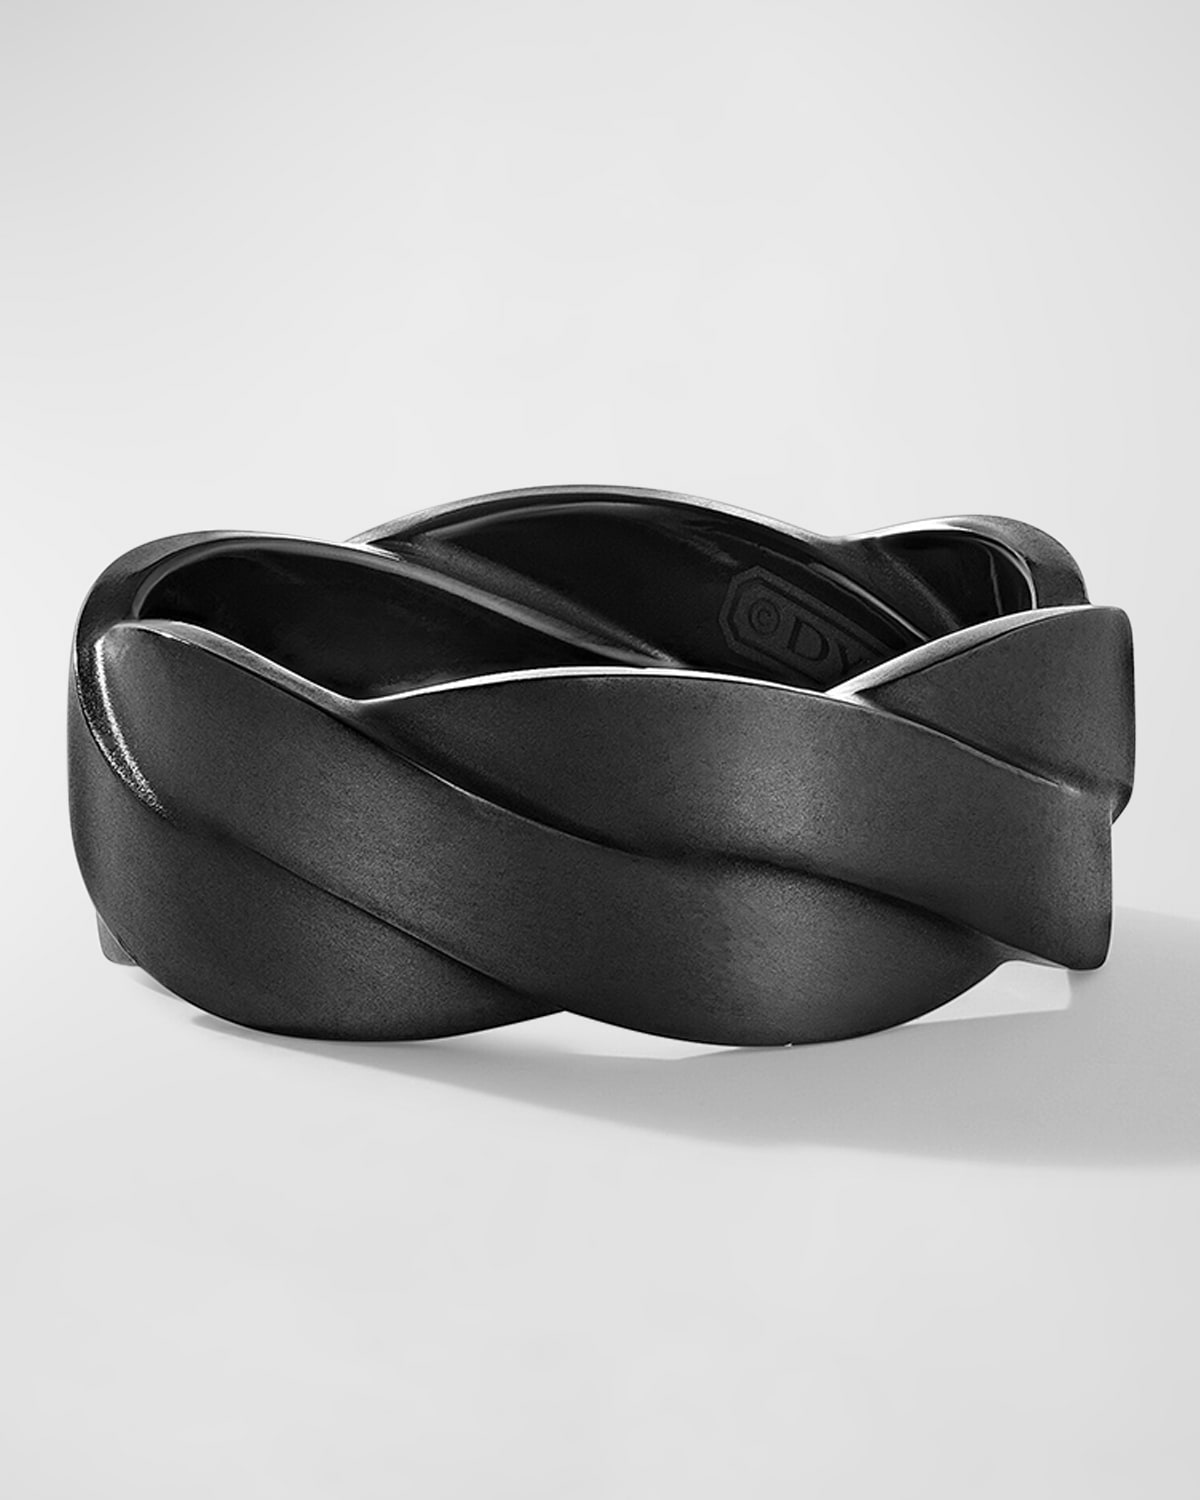 Men's DY Helios Band Ring in Black Titanium, 9mm